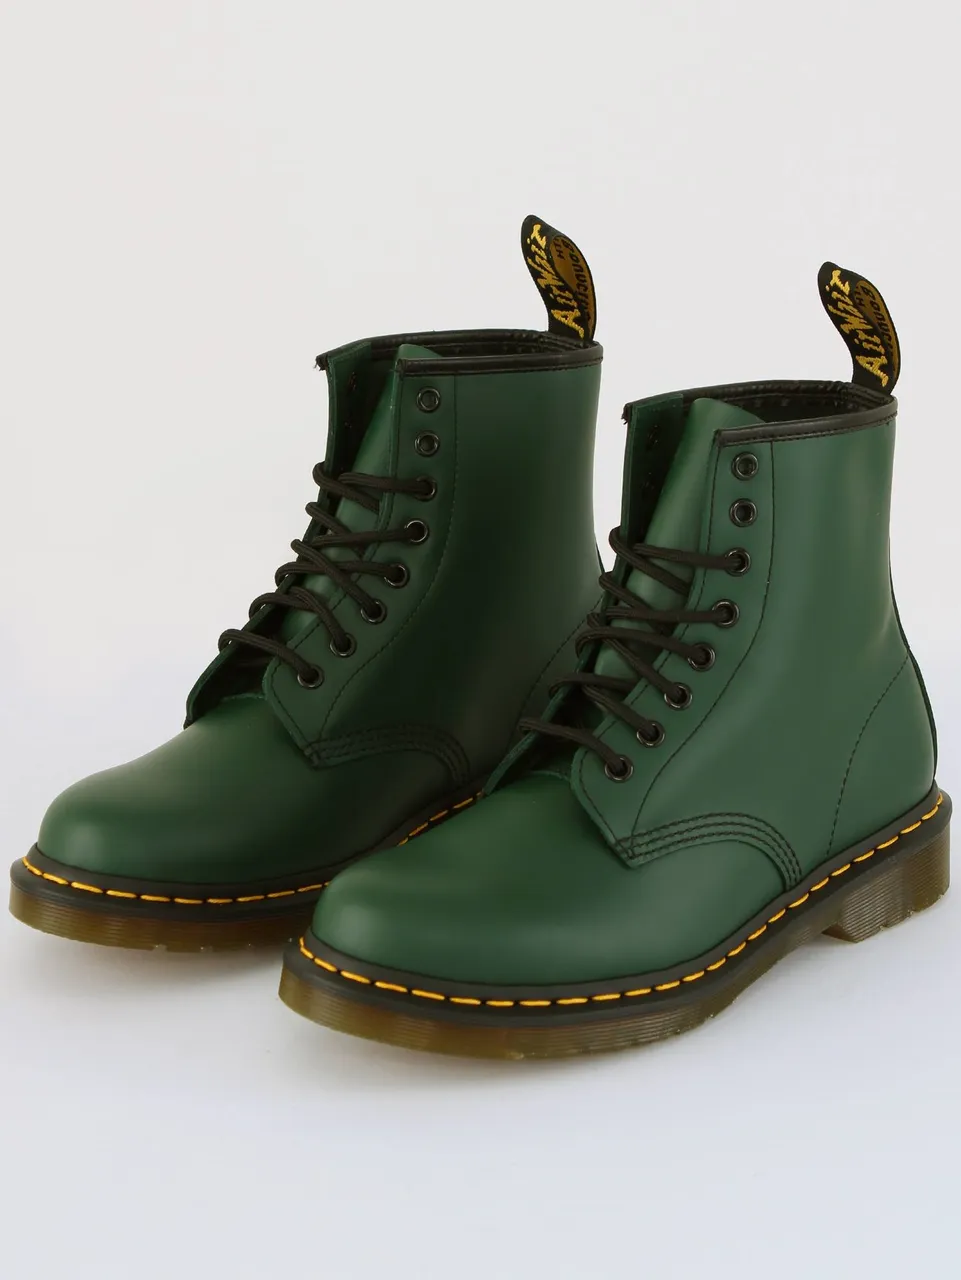 Dr Martens Green 1460 Smooth Leather Lace Up Boots